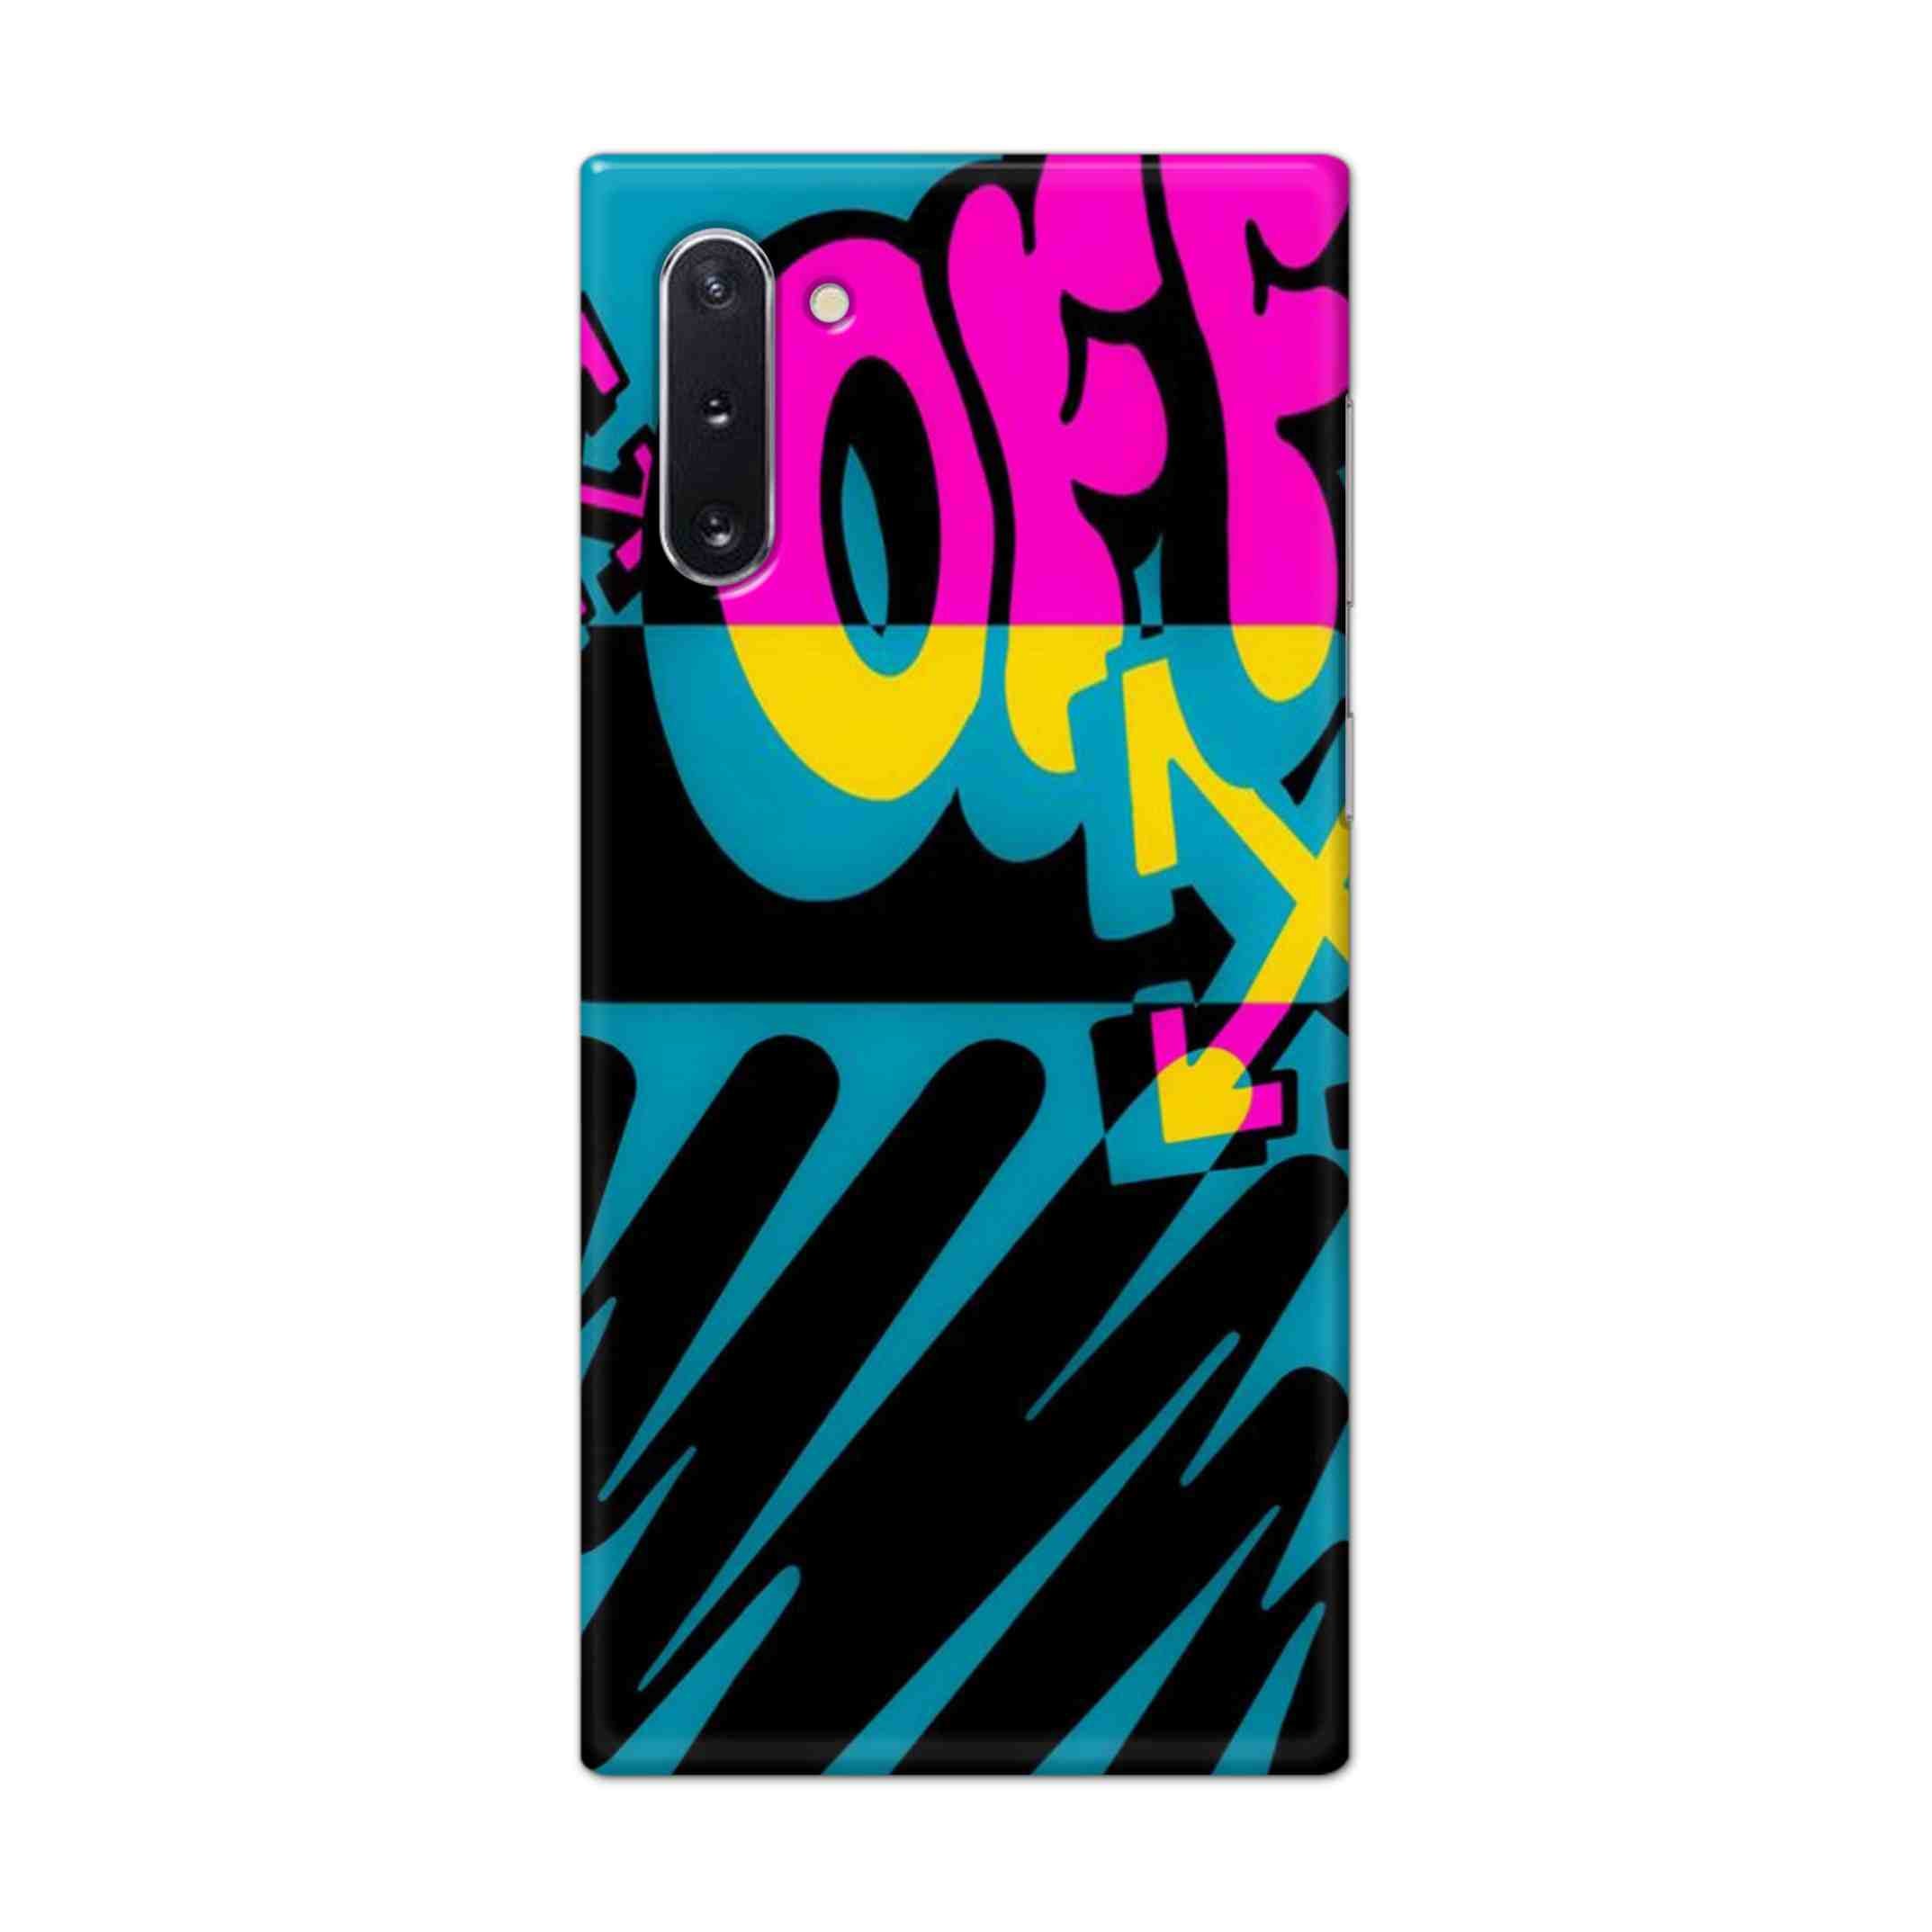 Buy Off Hard Back Mobile Phone Case Cover For Samsung Galaxy Note 10 Online